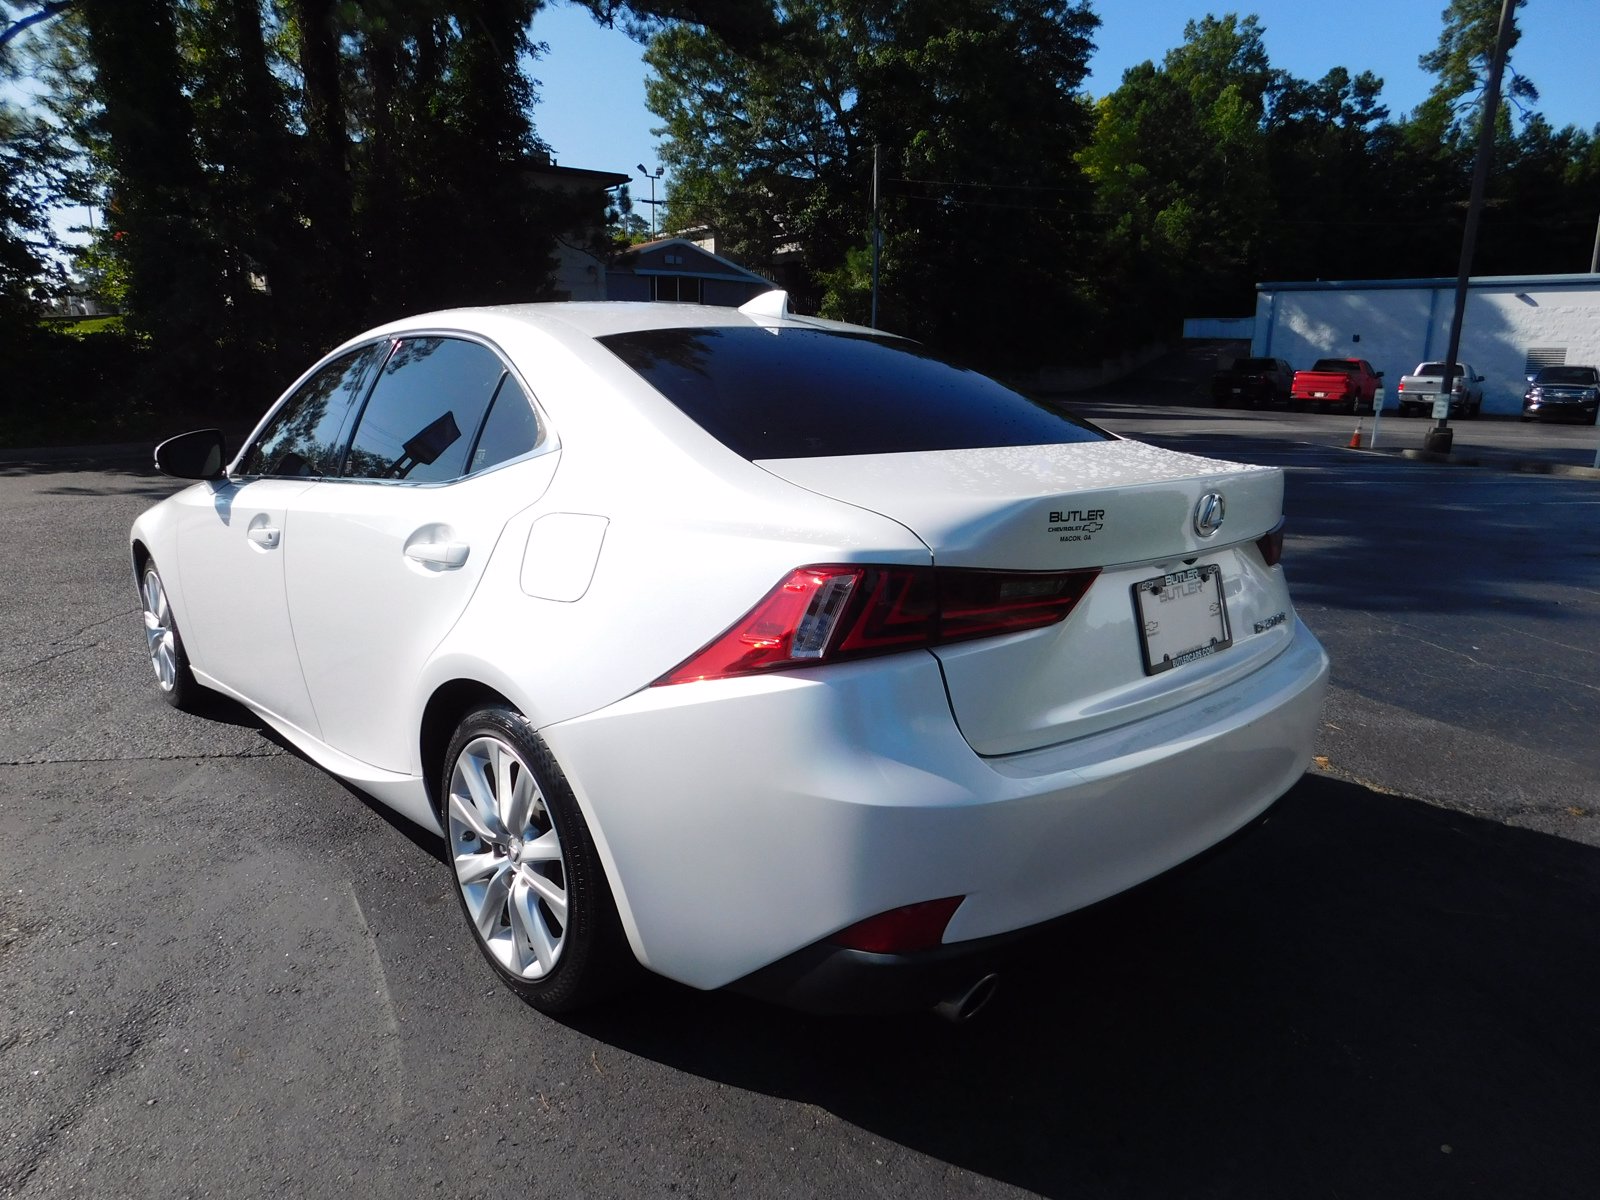 PreOwned 2016 Lexus IS 200t 200t 4dr Car in Columbus 